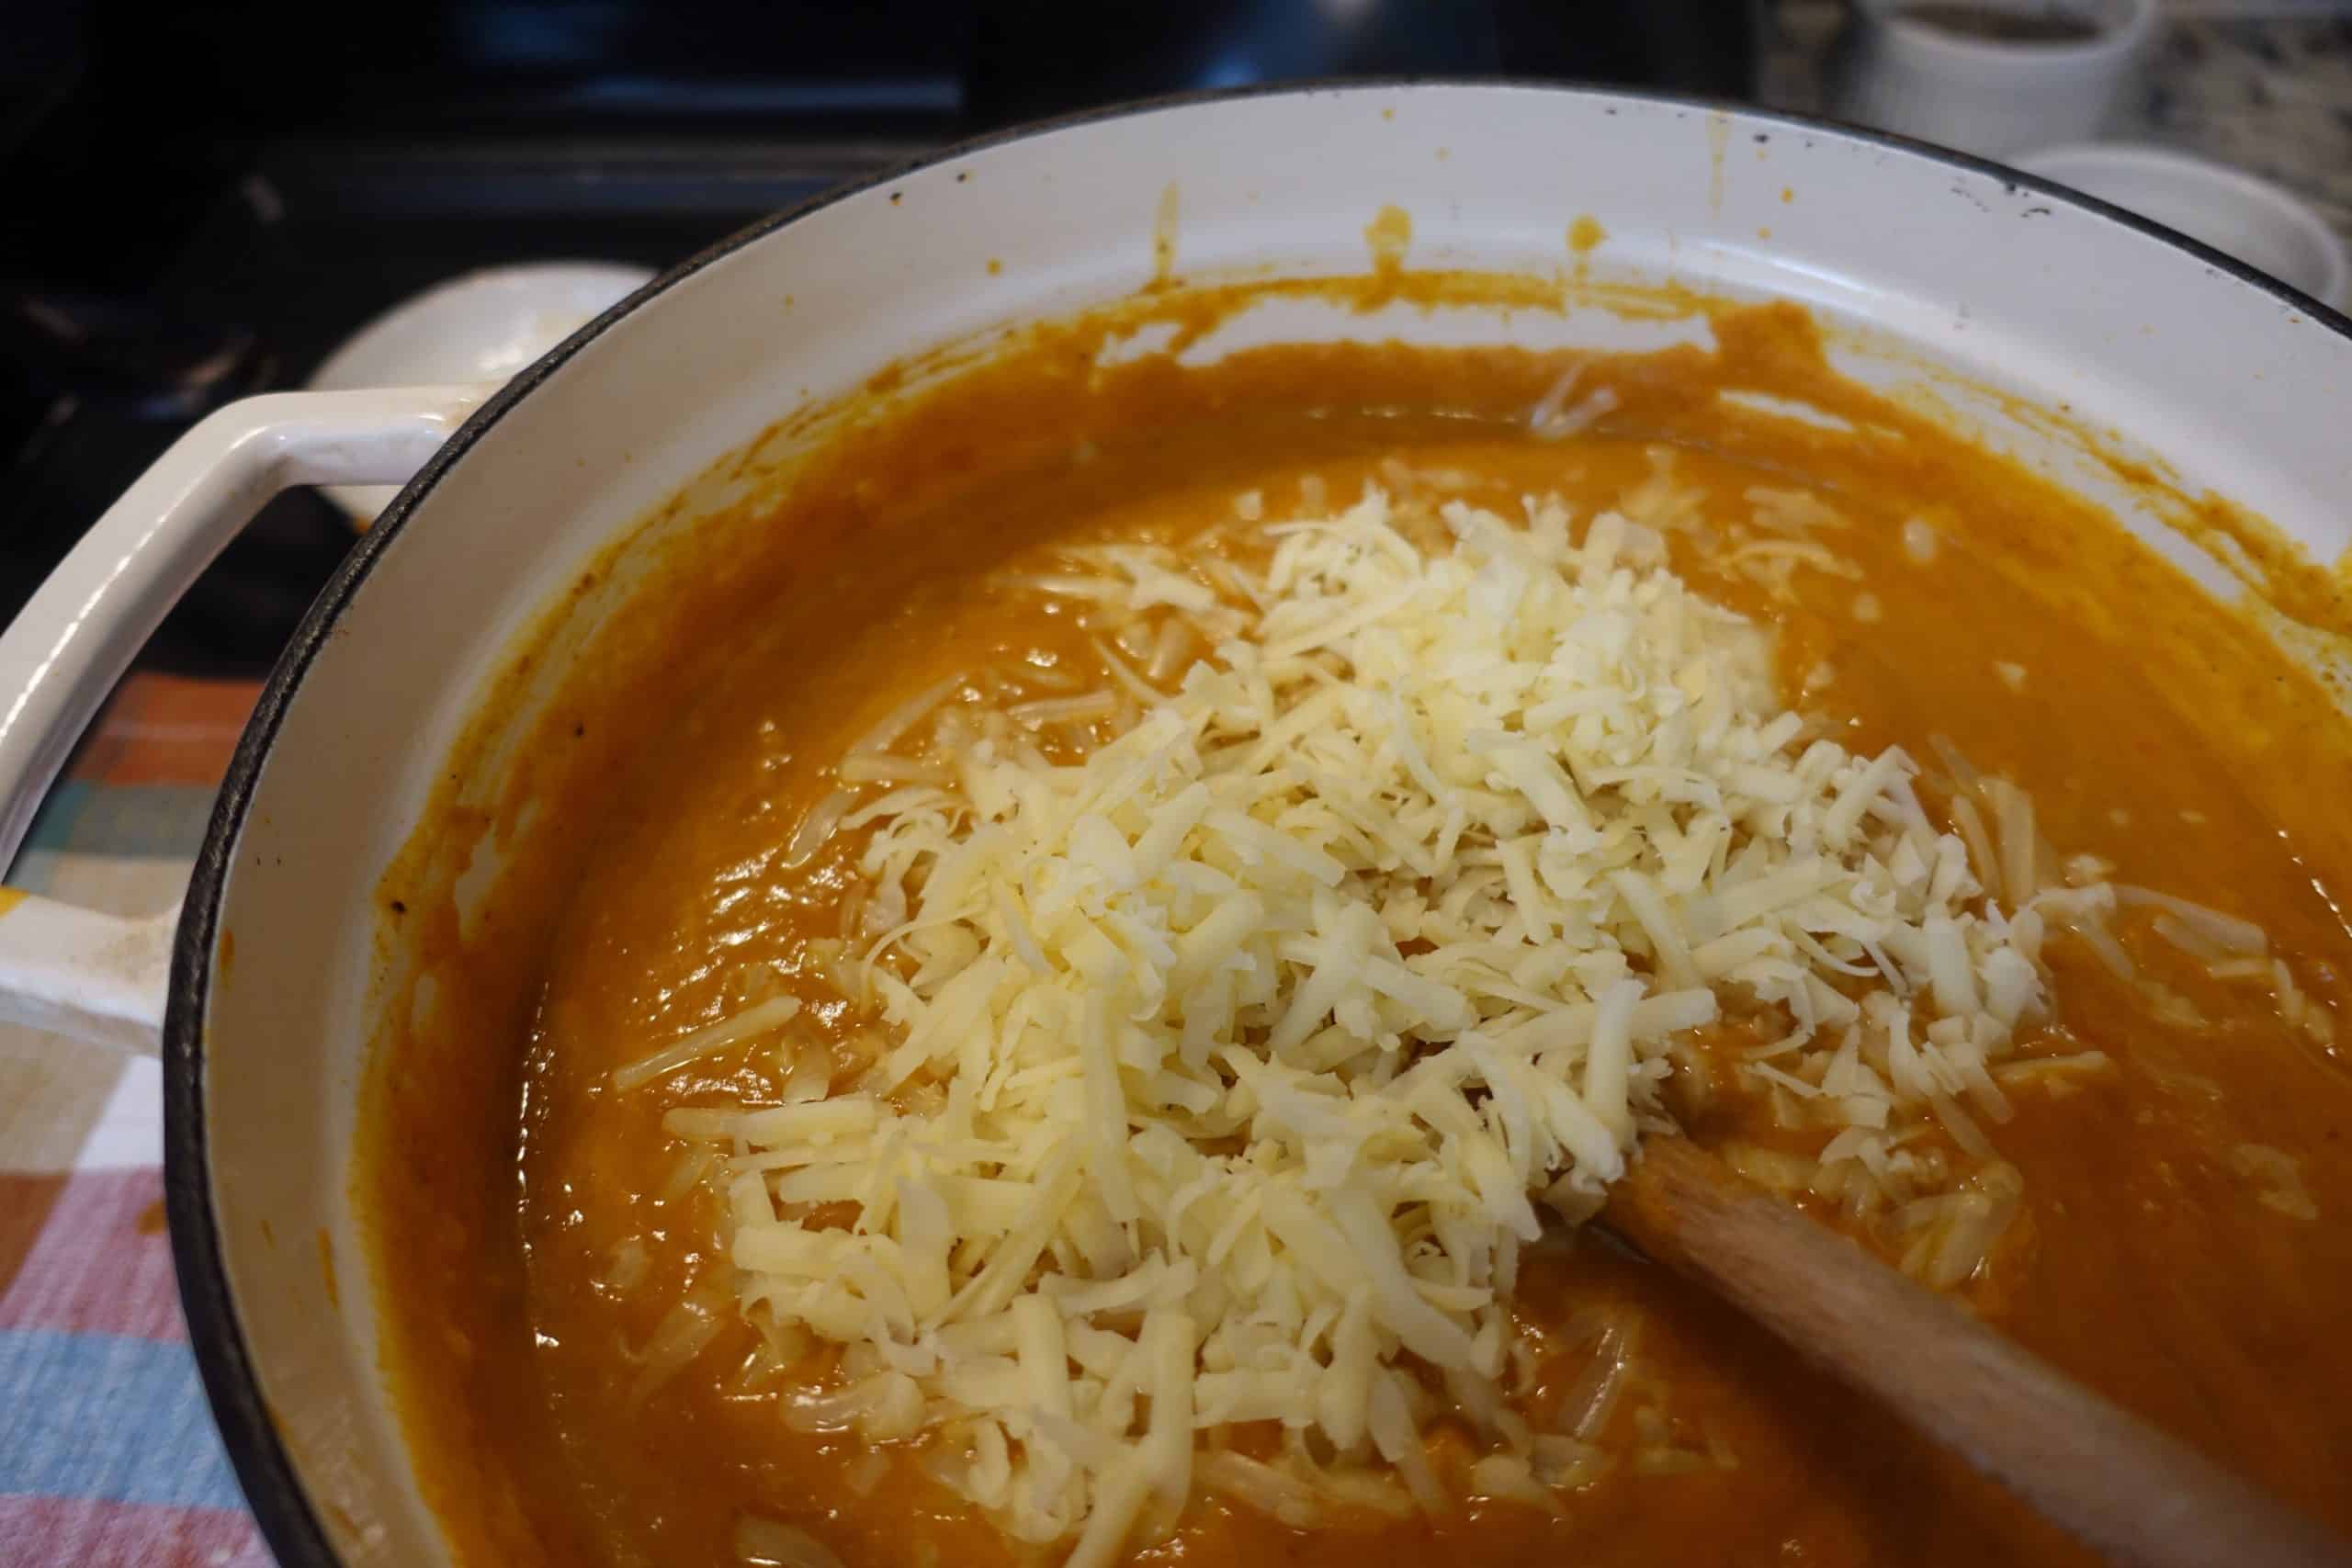 raw cheese and cream mixed in with spiced pumpkin chili